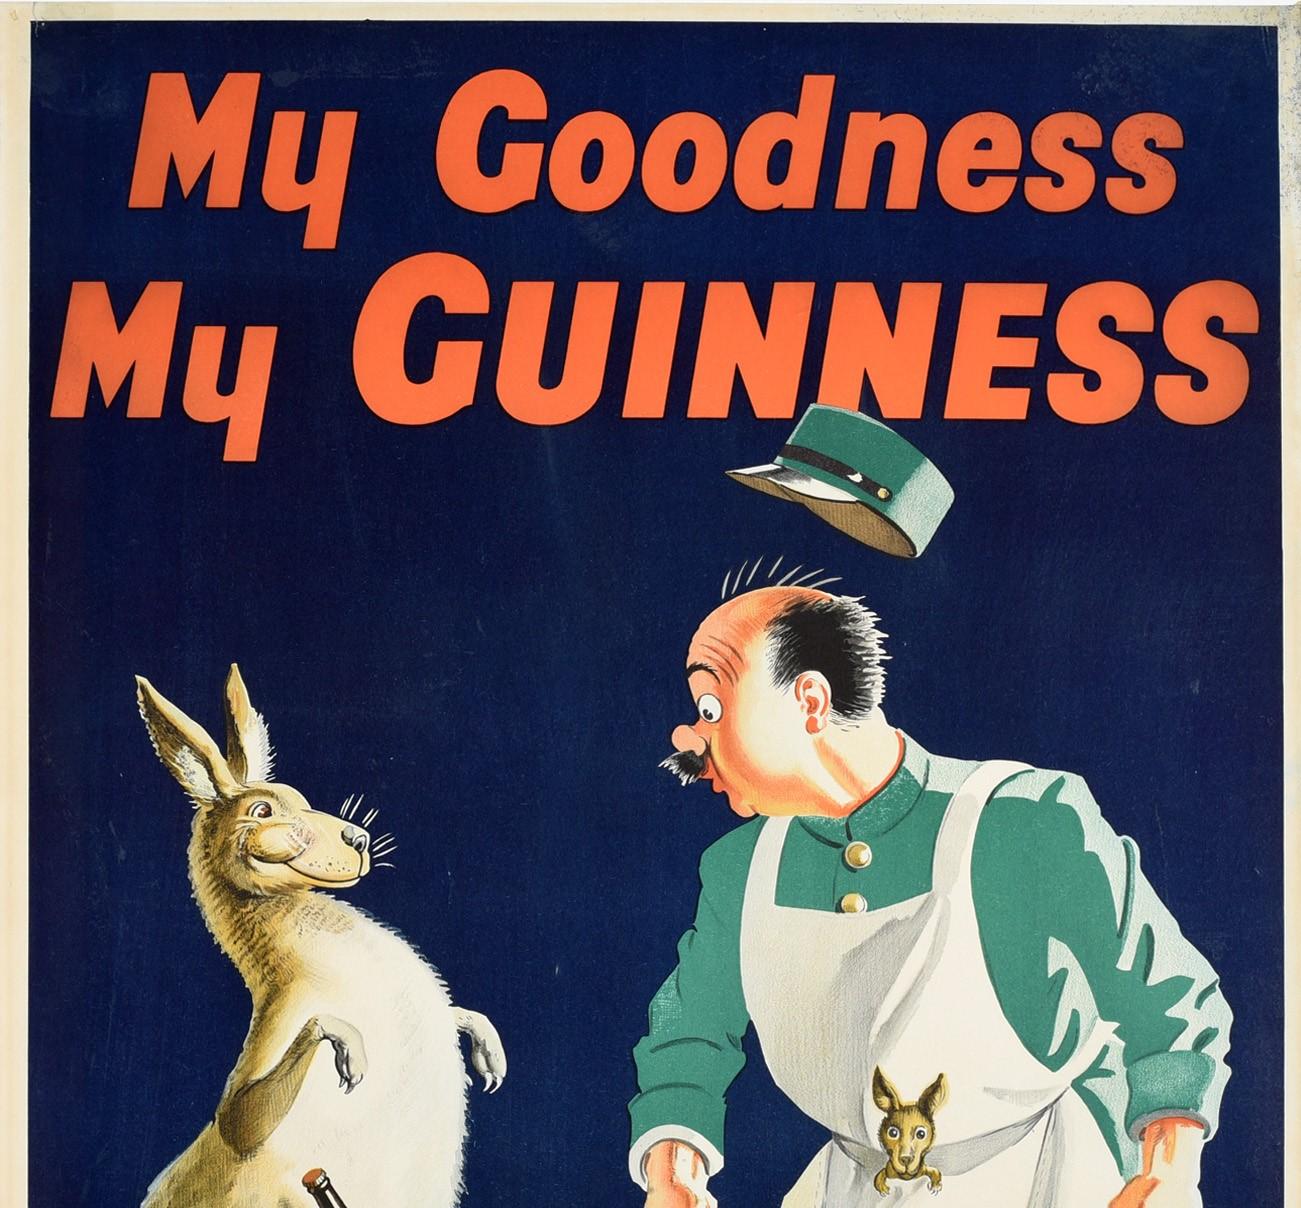 Original Vintage Drink Poster My Goodness My Guinness Kangaroo Beer Bottle Pouch - Print by John Gilroy